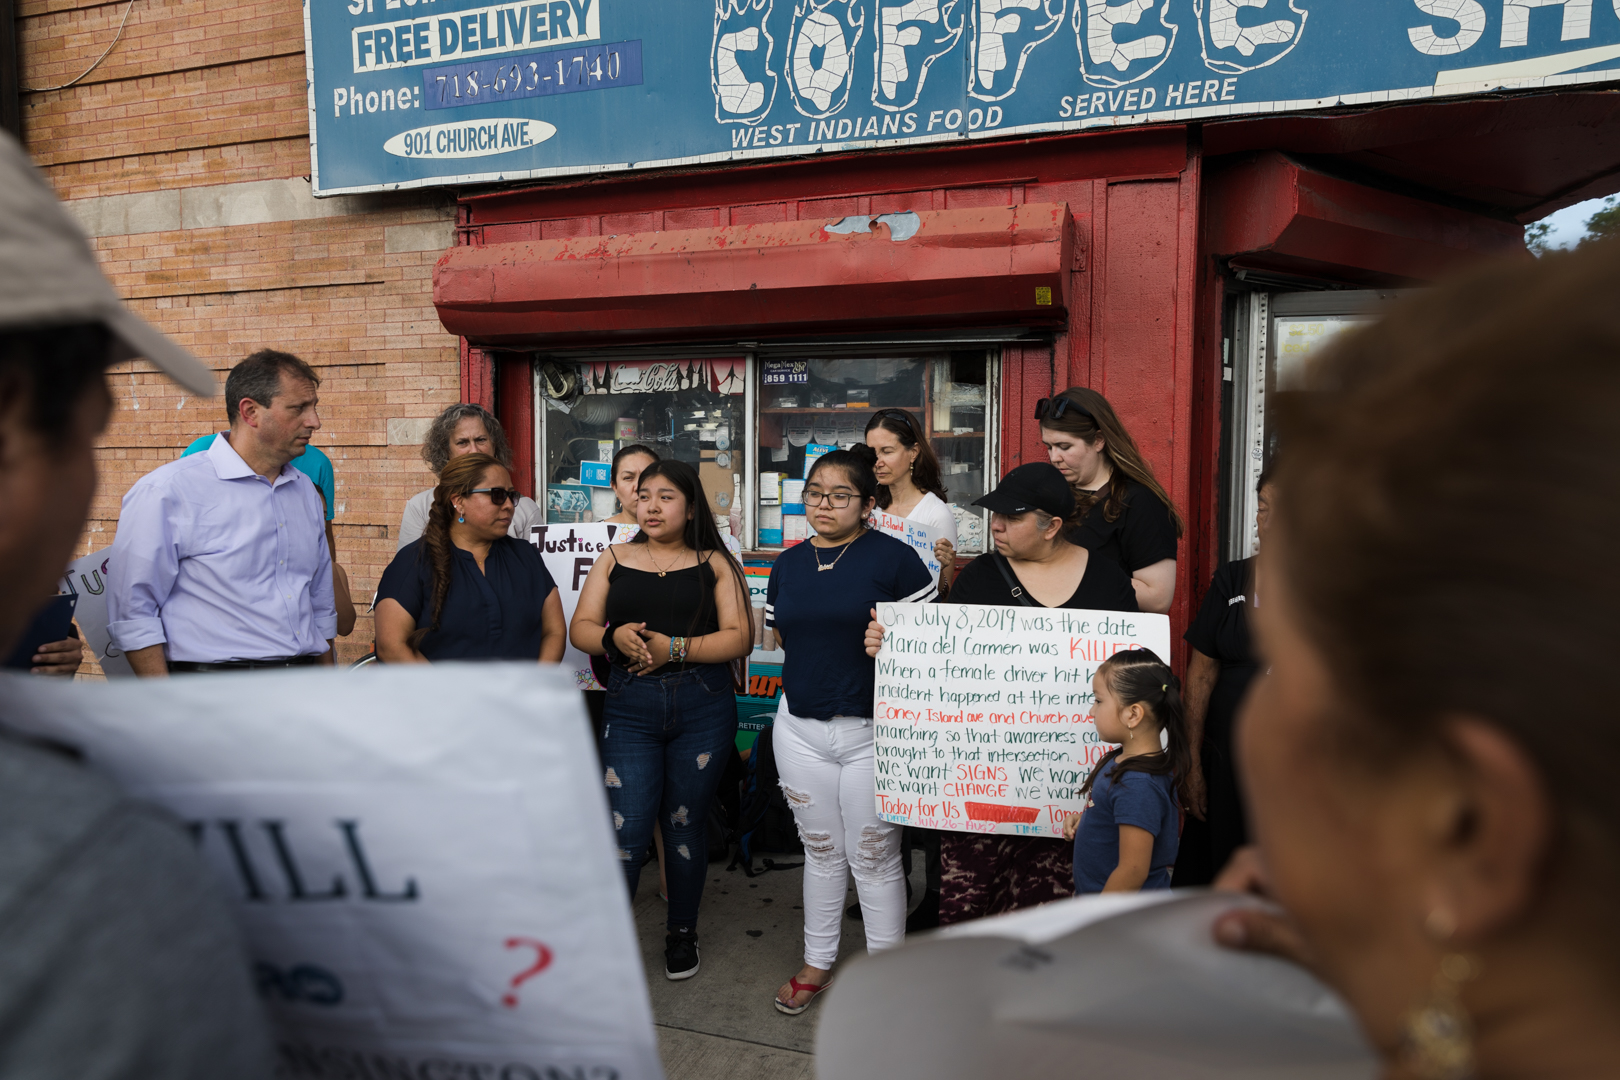 Dozens of family members and friends of María del Carmen Porras Hernández gathered at the corner of Coney Island and Church avenues. Eagle photo by Paul Frangipane